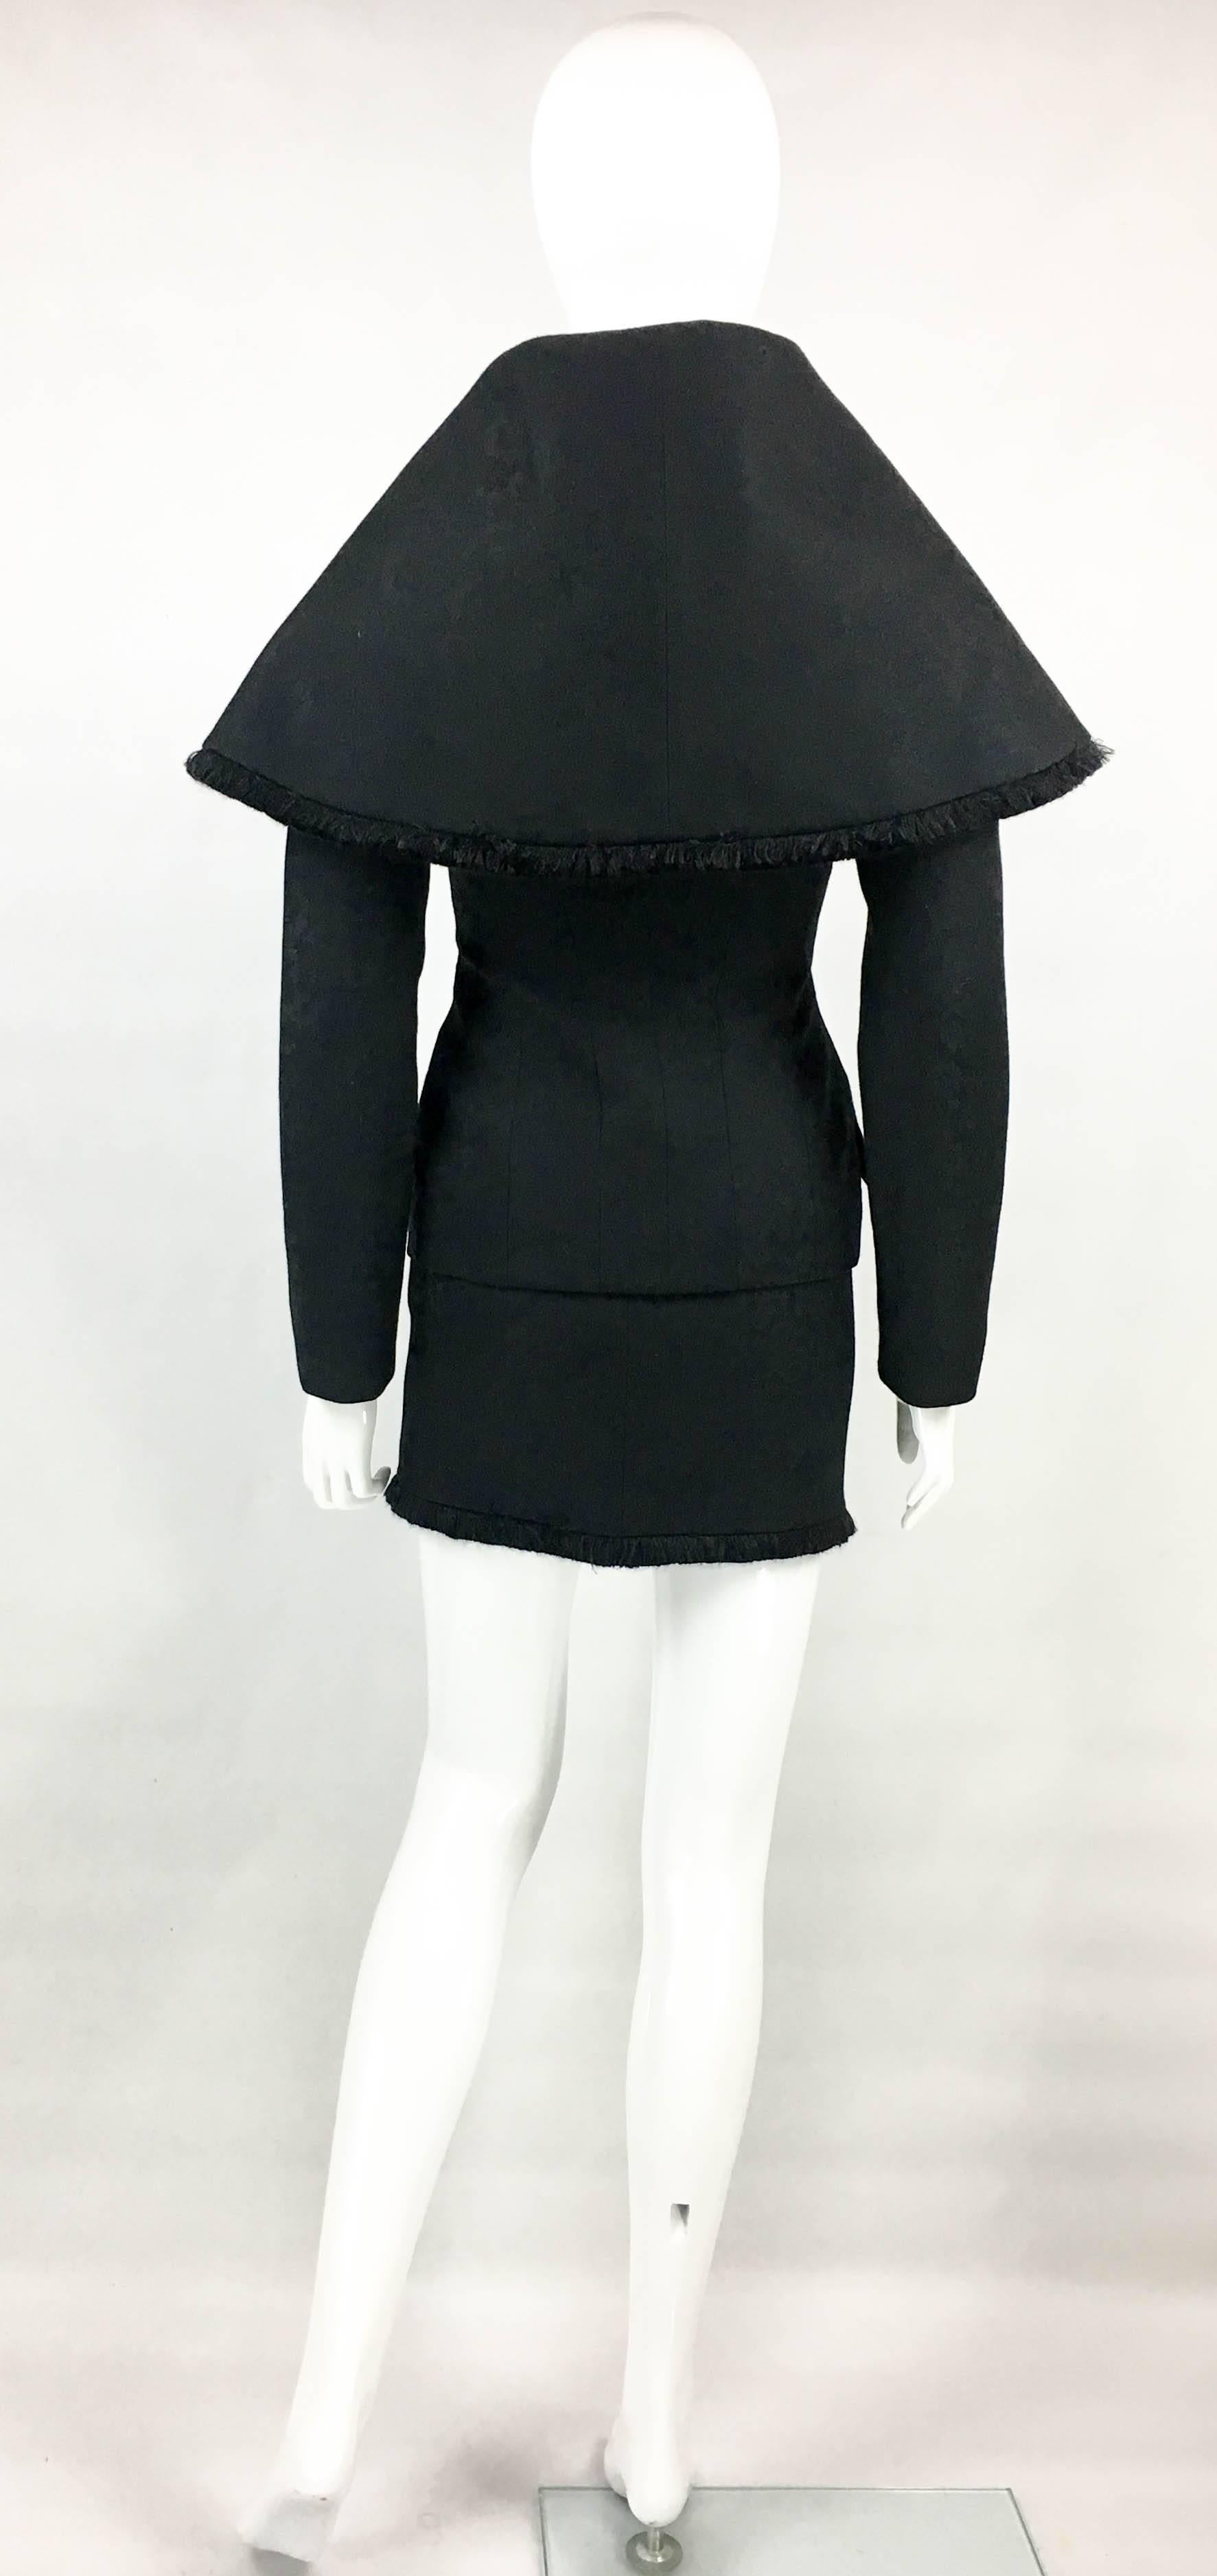 Dior by Galliano 1998 Add Campaign Black Skirt Suit with Dramatic Collar 2